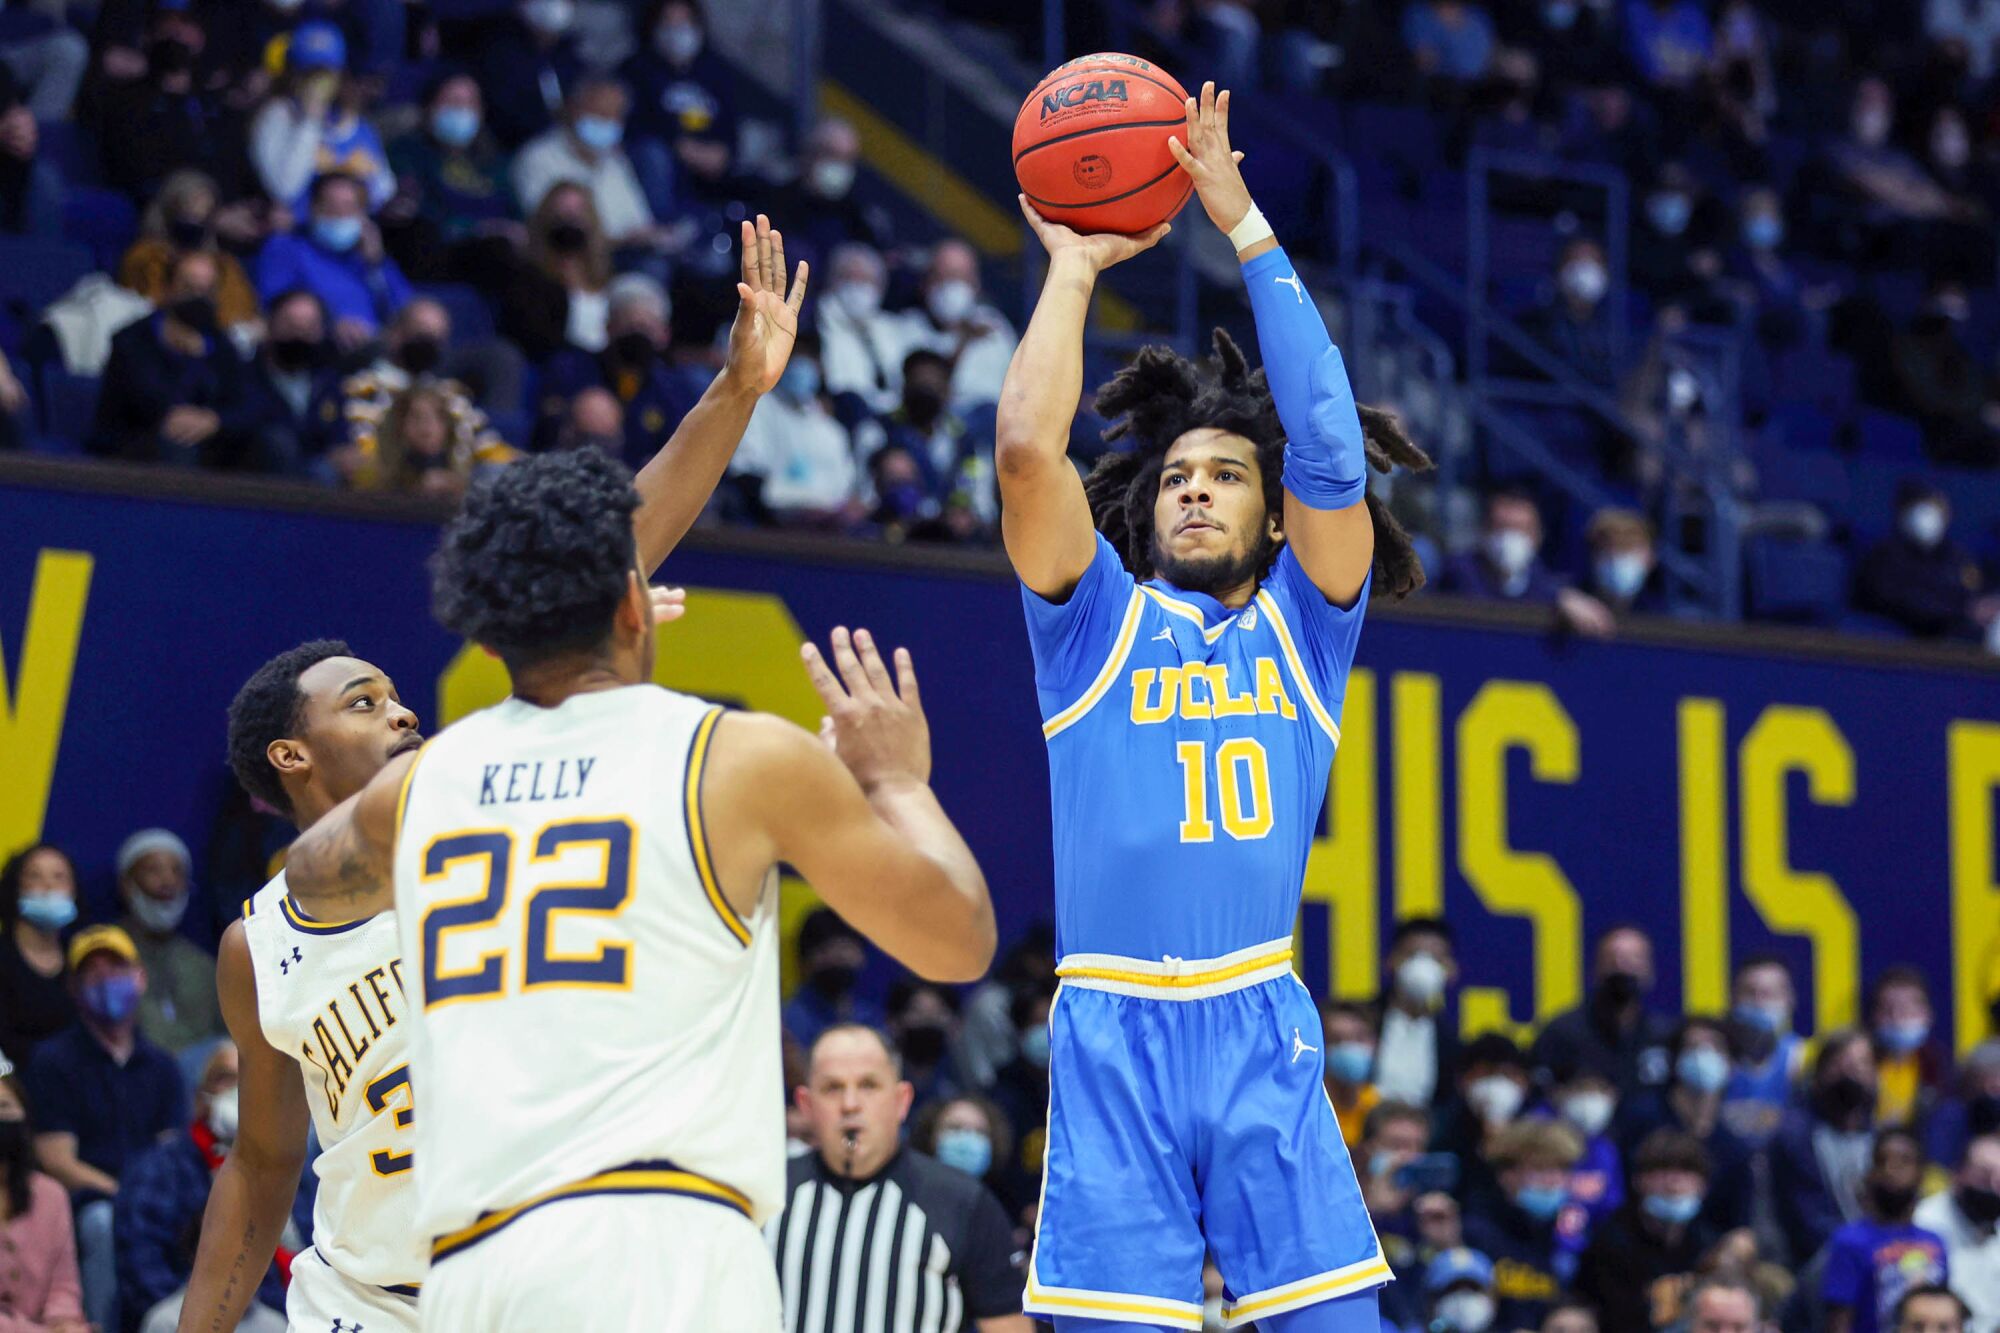 UCLA guard Tyger Campbell shoots against California's Jalen Celestine (32) and Andre Kelly (22) on Saturday in Berkeley.